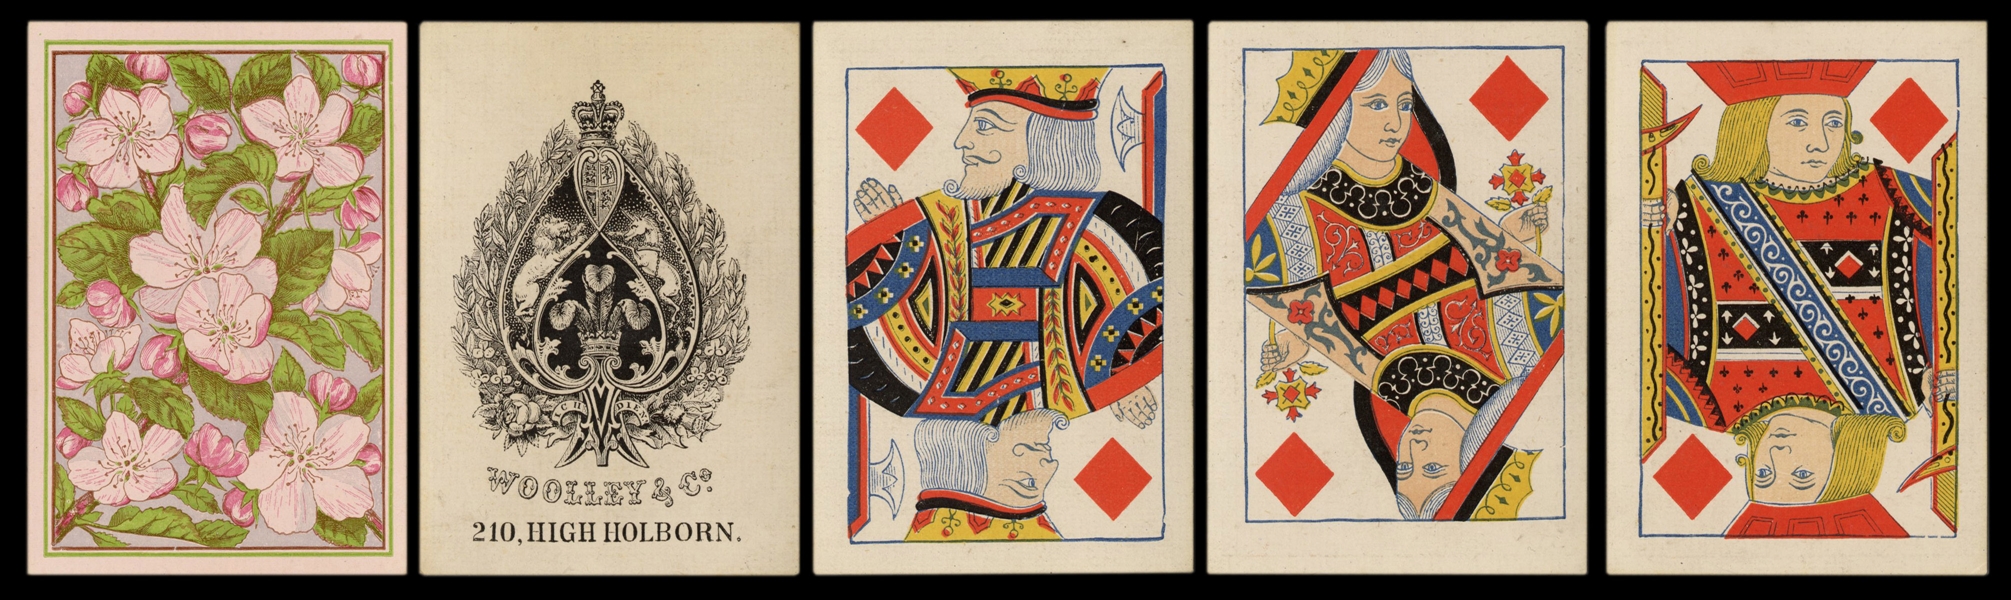  Wooley & Co. Playing Cards. London: Wooley & Co., ca. 1880....